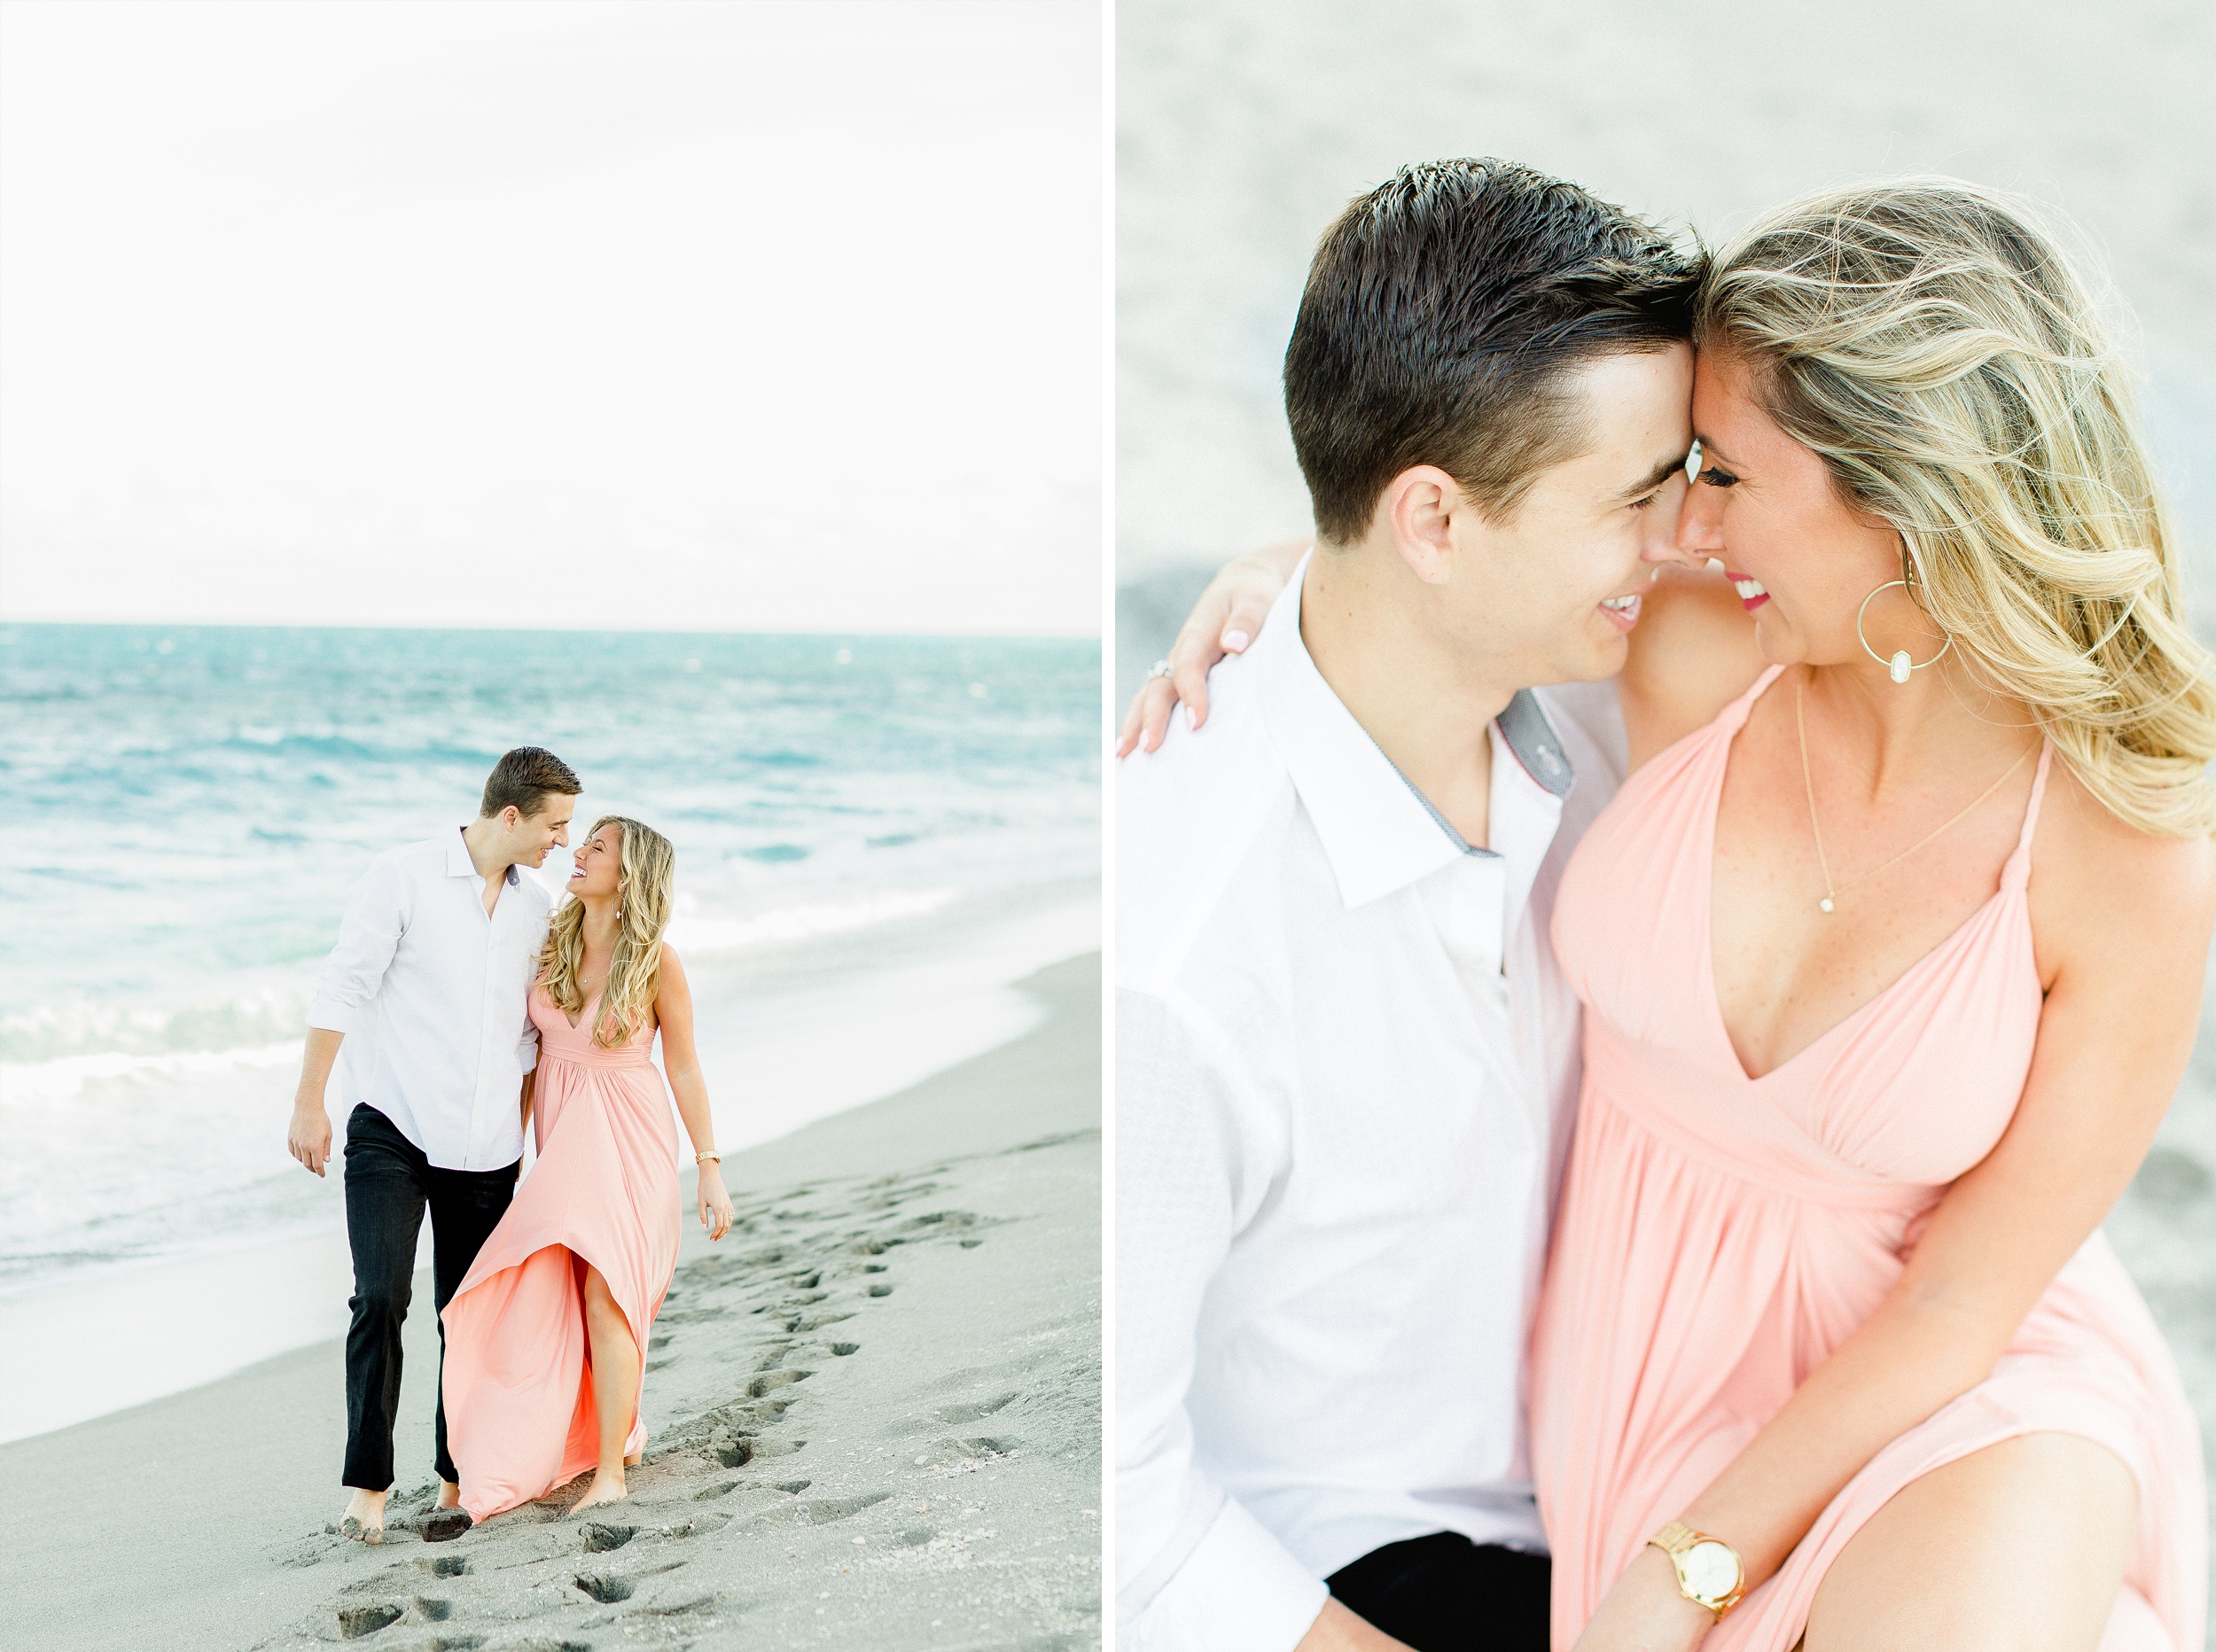 South Florida Engagement | © Ailyn La Torre Photography 2020